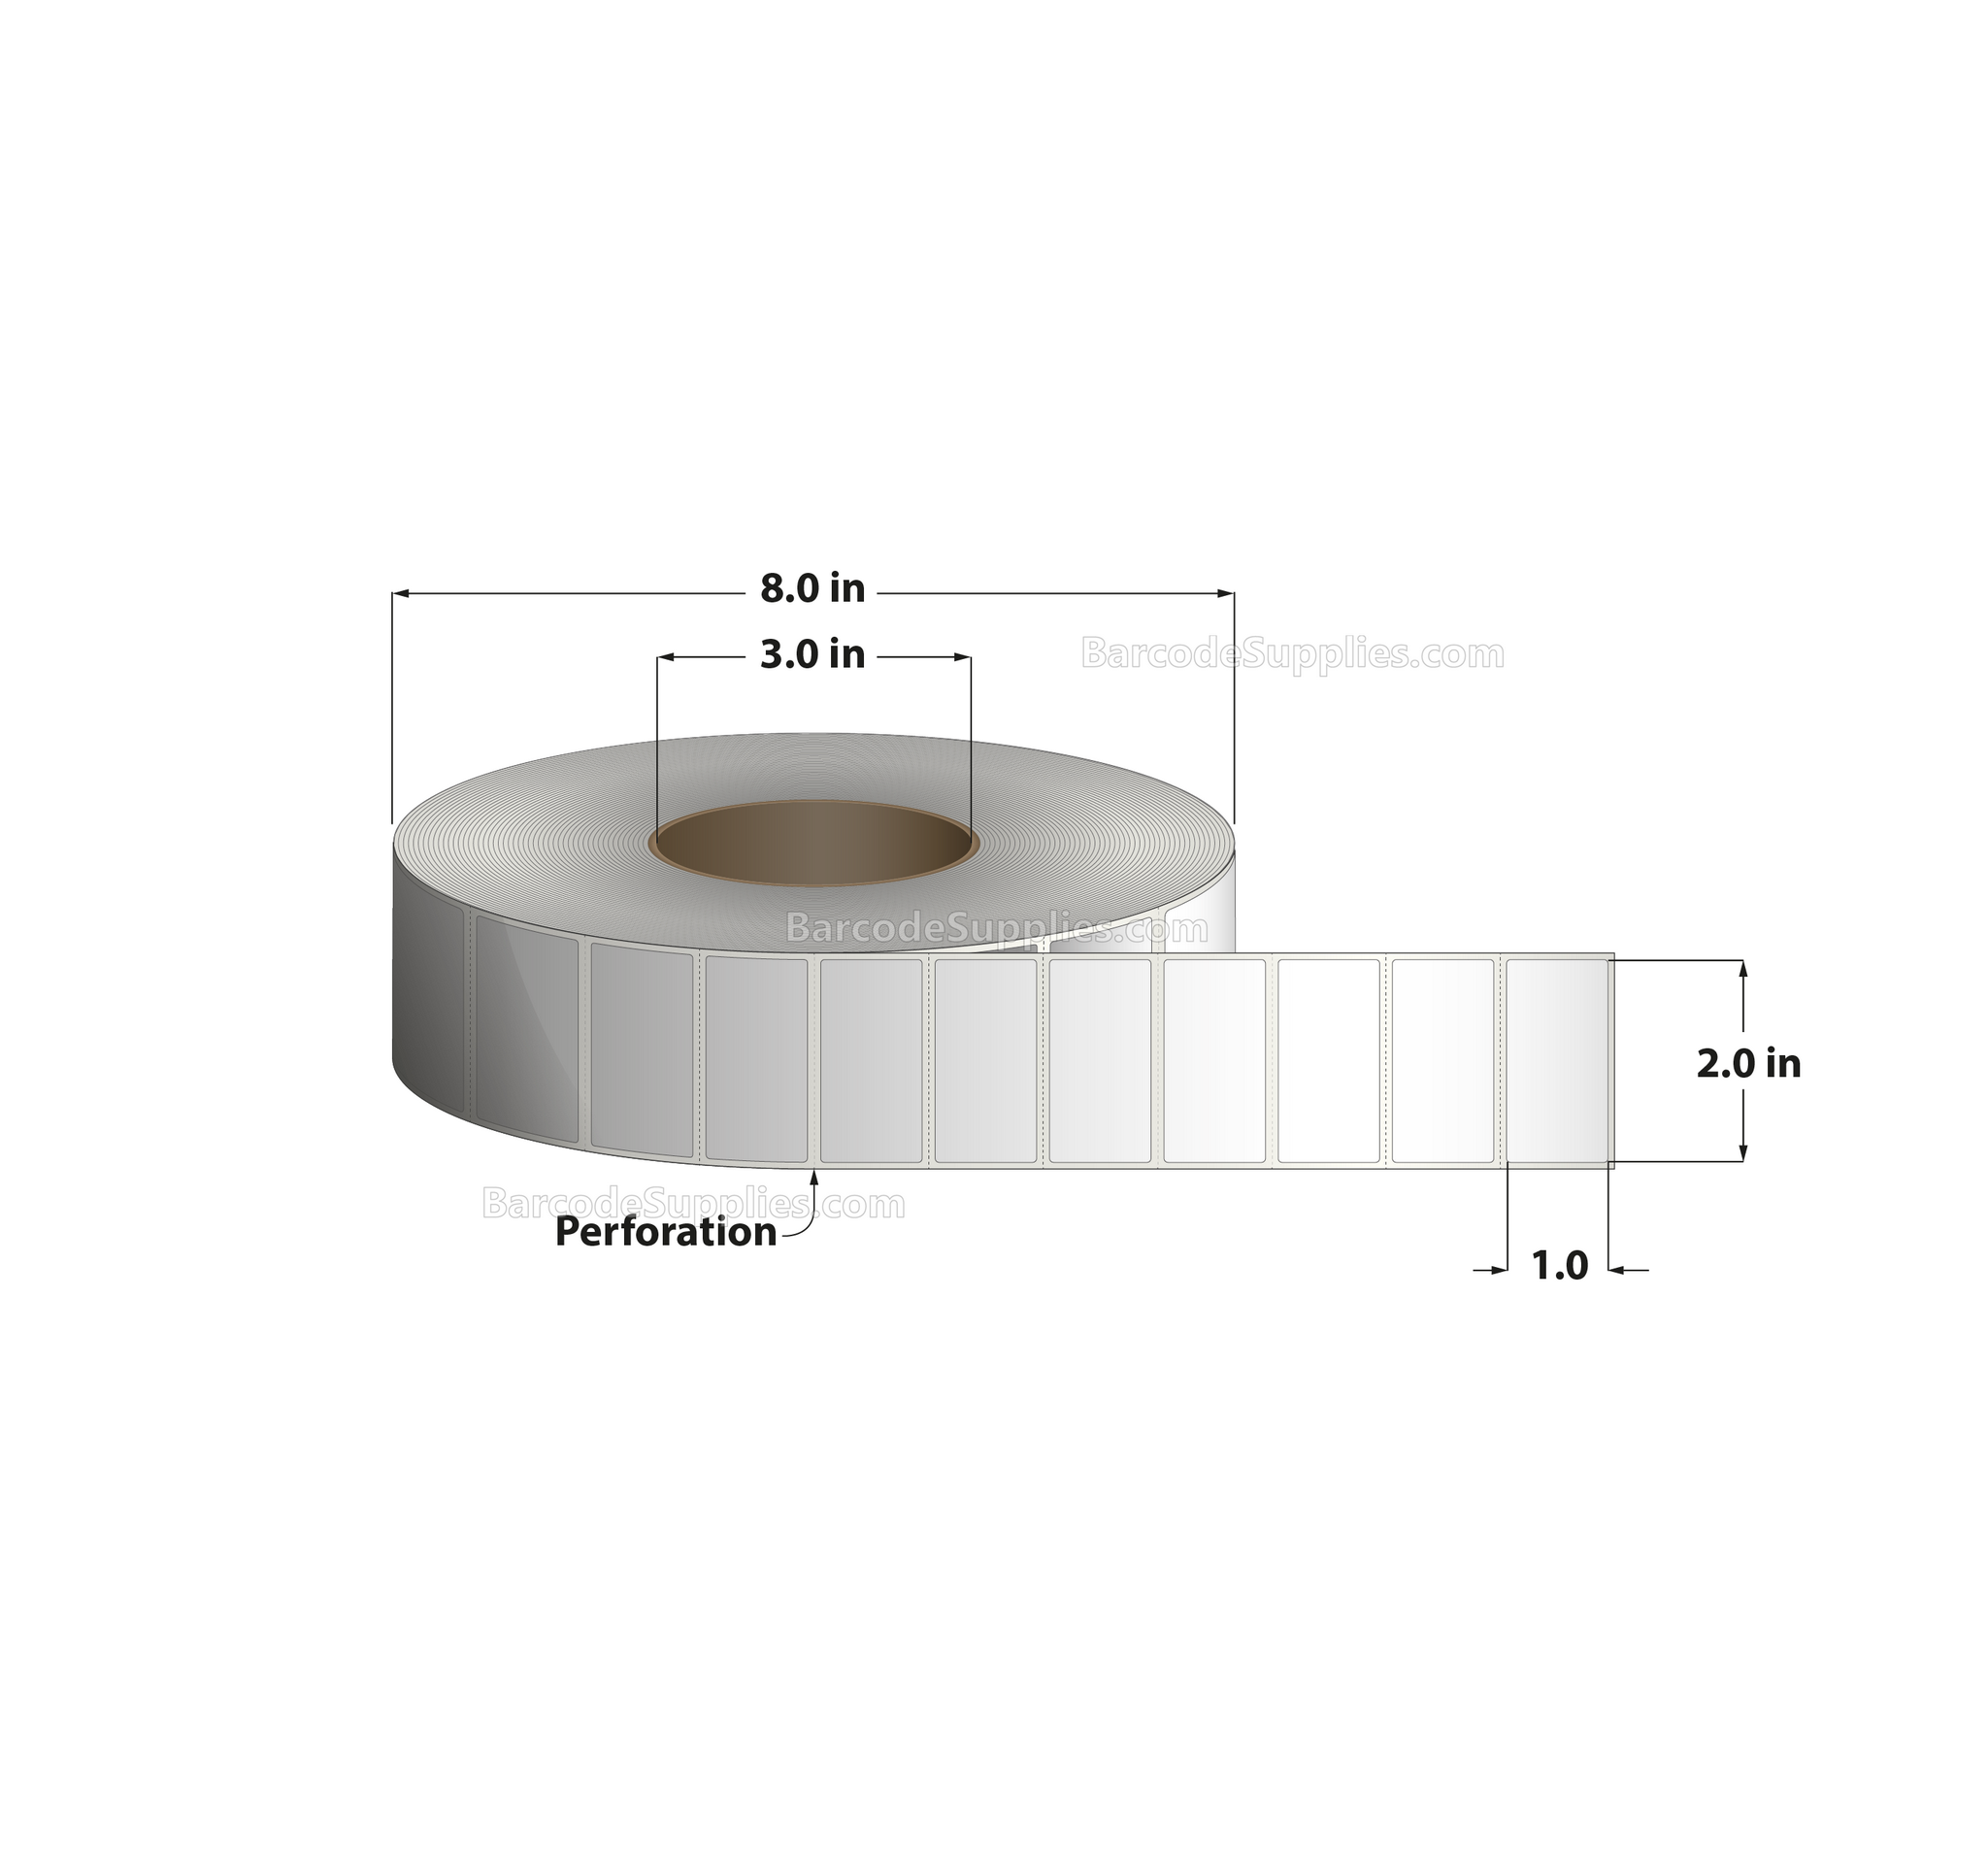 2 x 1 Thermal Transfer White Labels With Permanent Acrylic Adhesive - Perforated - 5500 Labels Per Roll - Carton Of 8 Rolls - 44000 Labels Total - MPN: TH21-1P